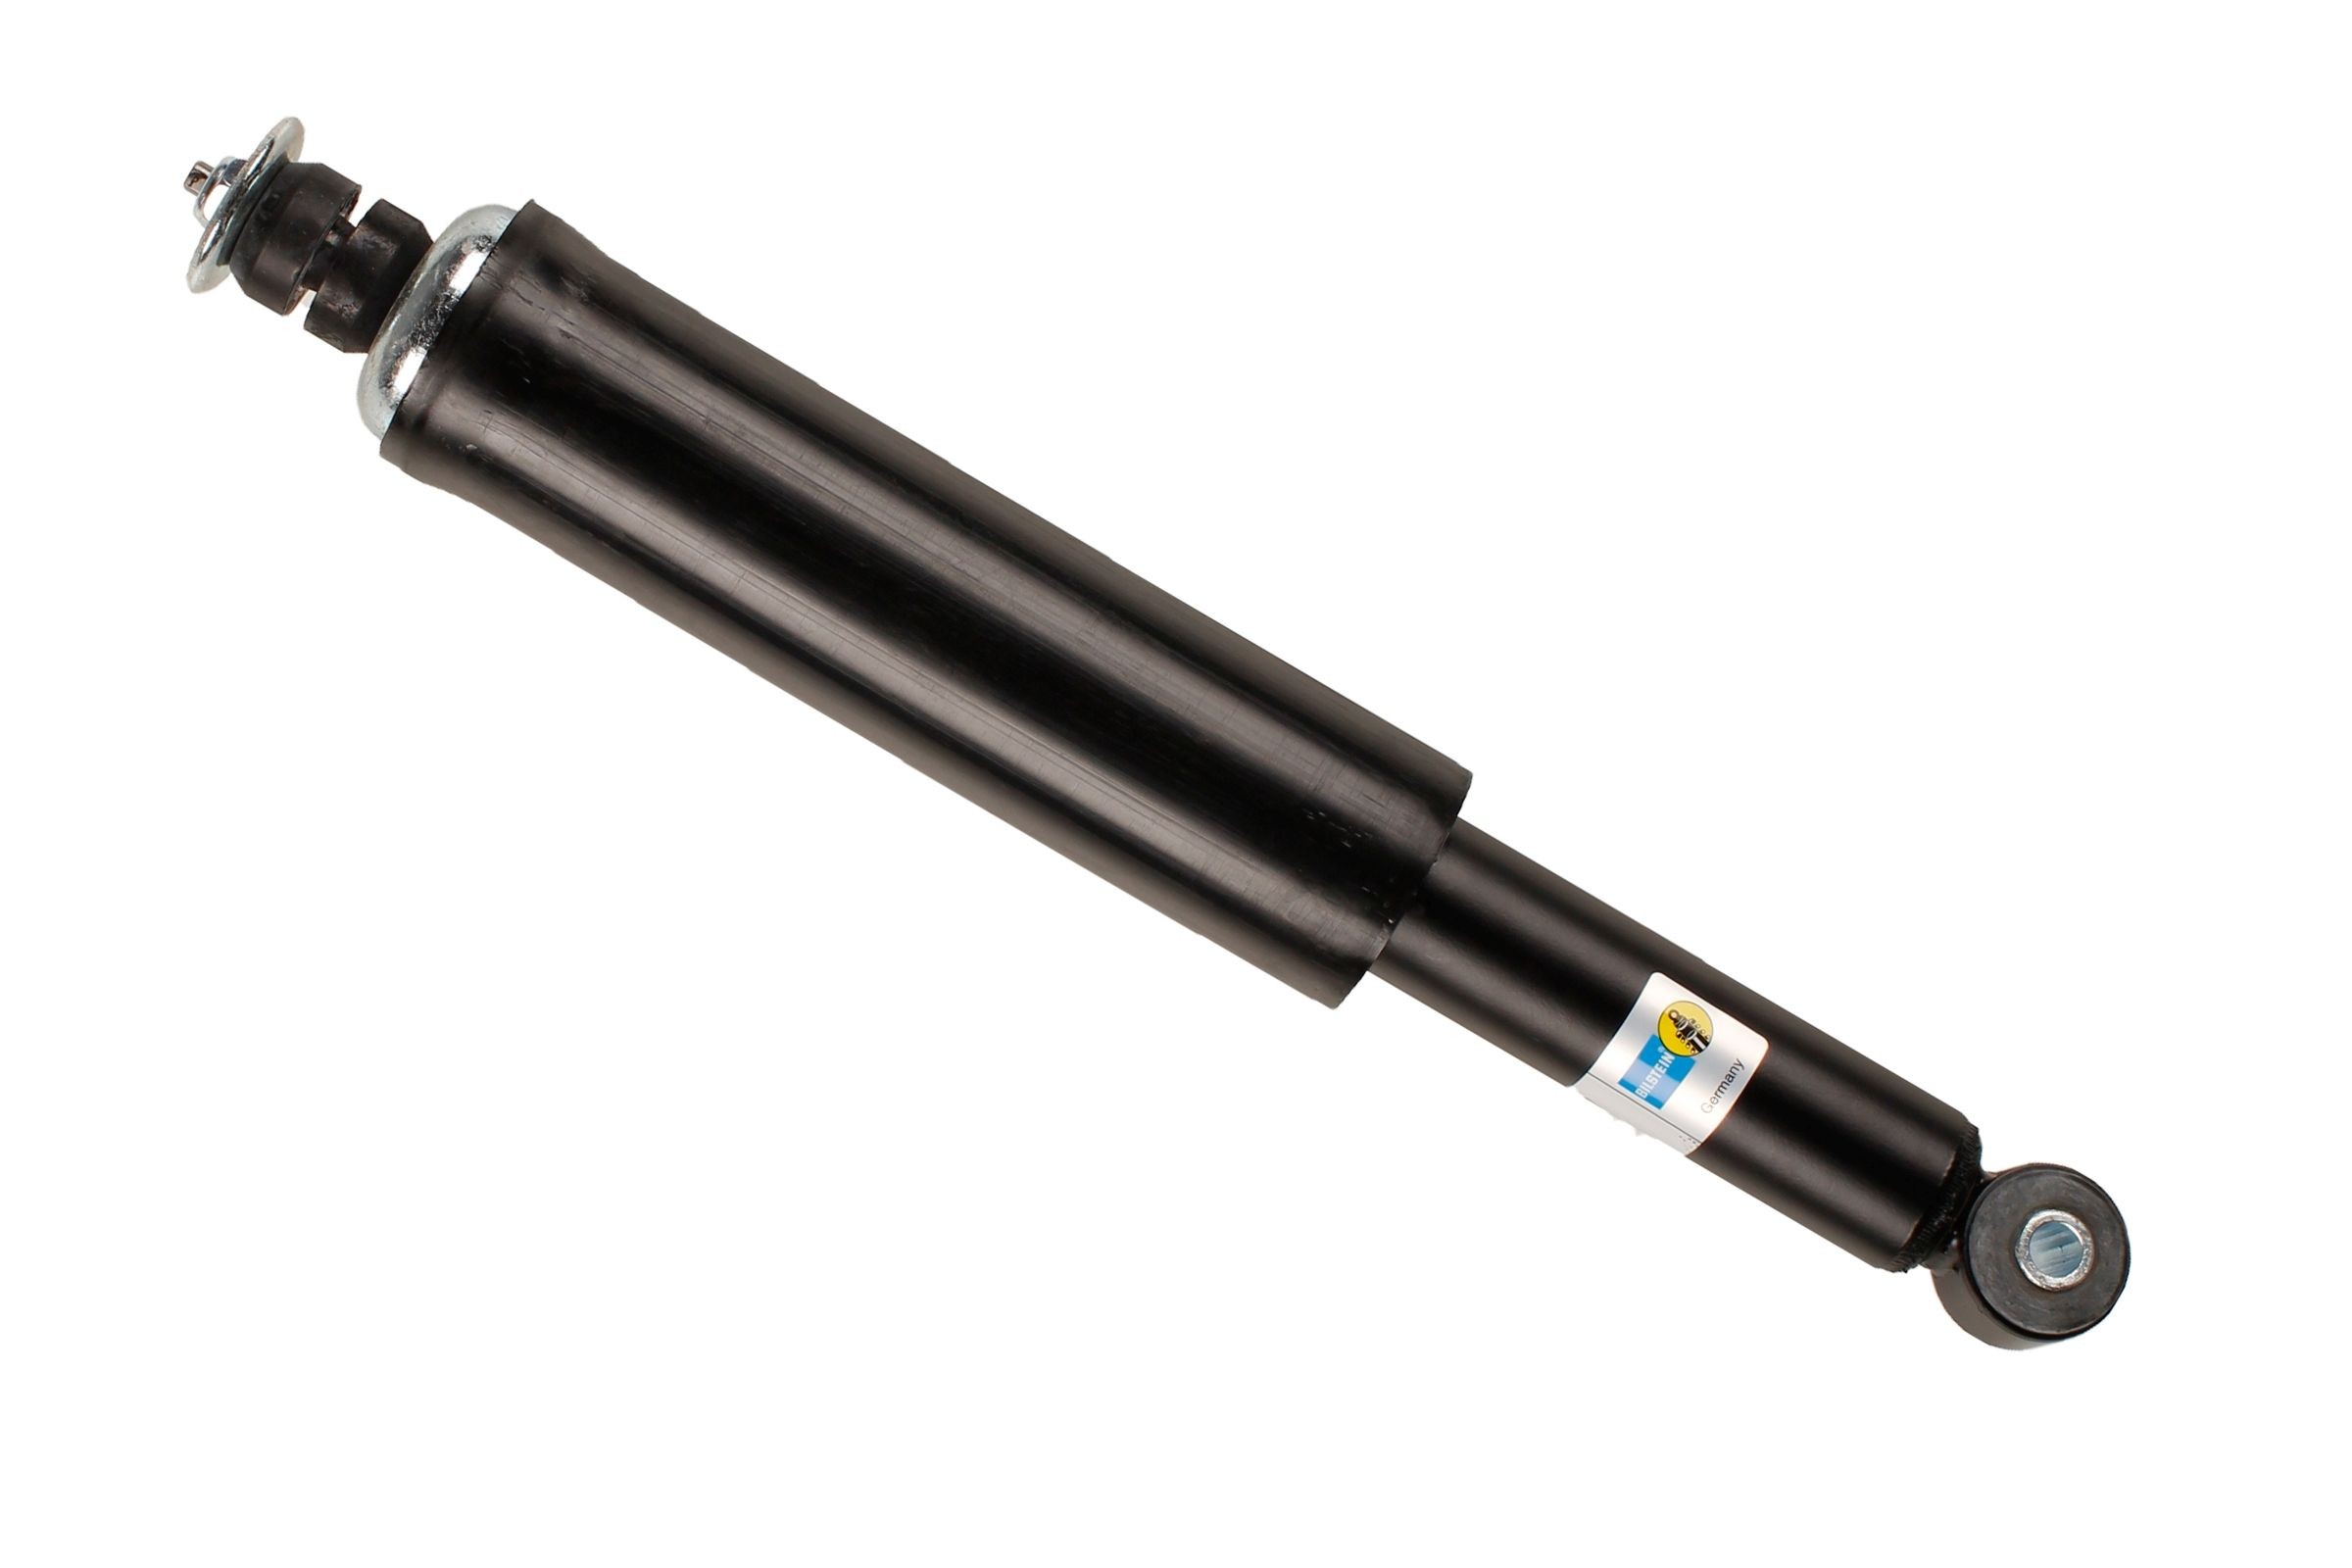 BILSTEIN - B4 OE Replacement (Oil) 15-069177 Shock absorber Rear Axle, Oil Pressure, Twin-Tube, Absorber does not carry a spring, Bottom eye, Top pin